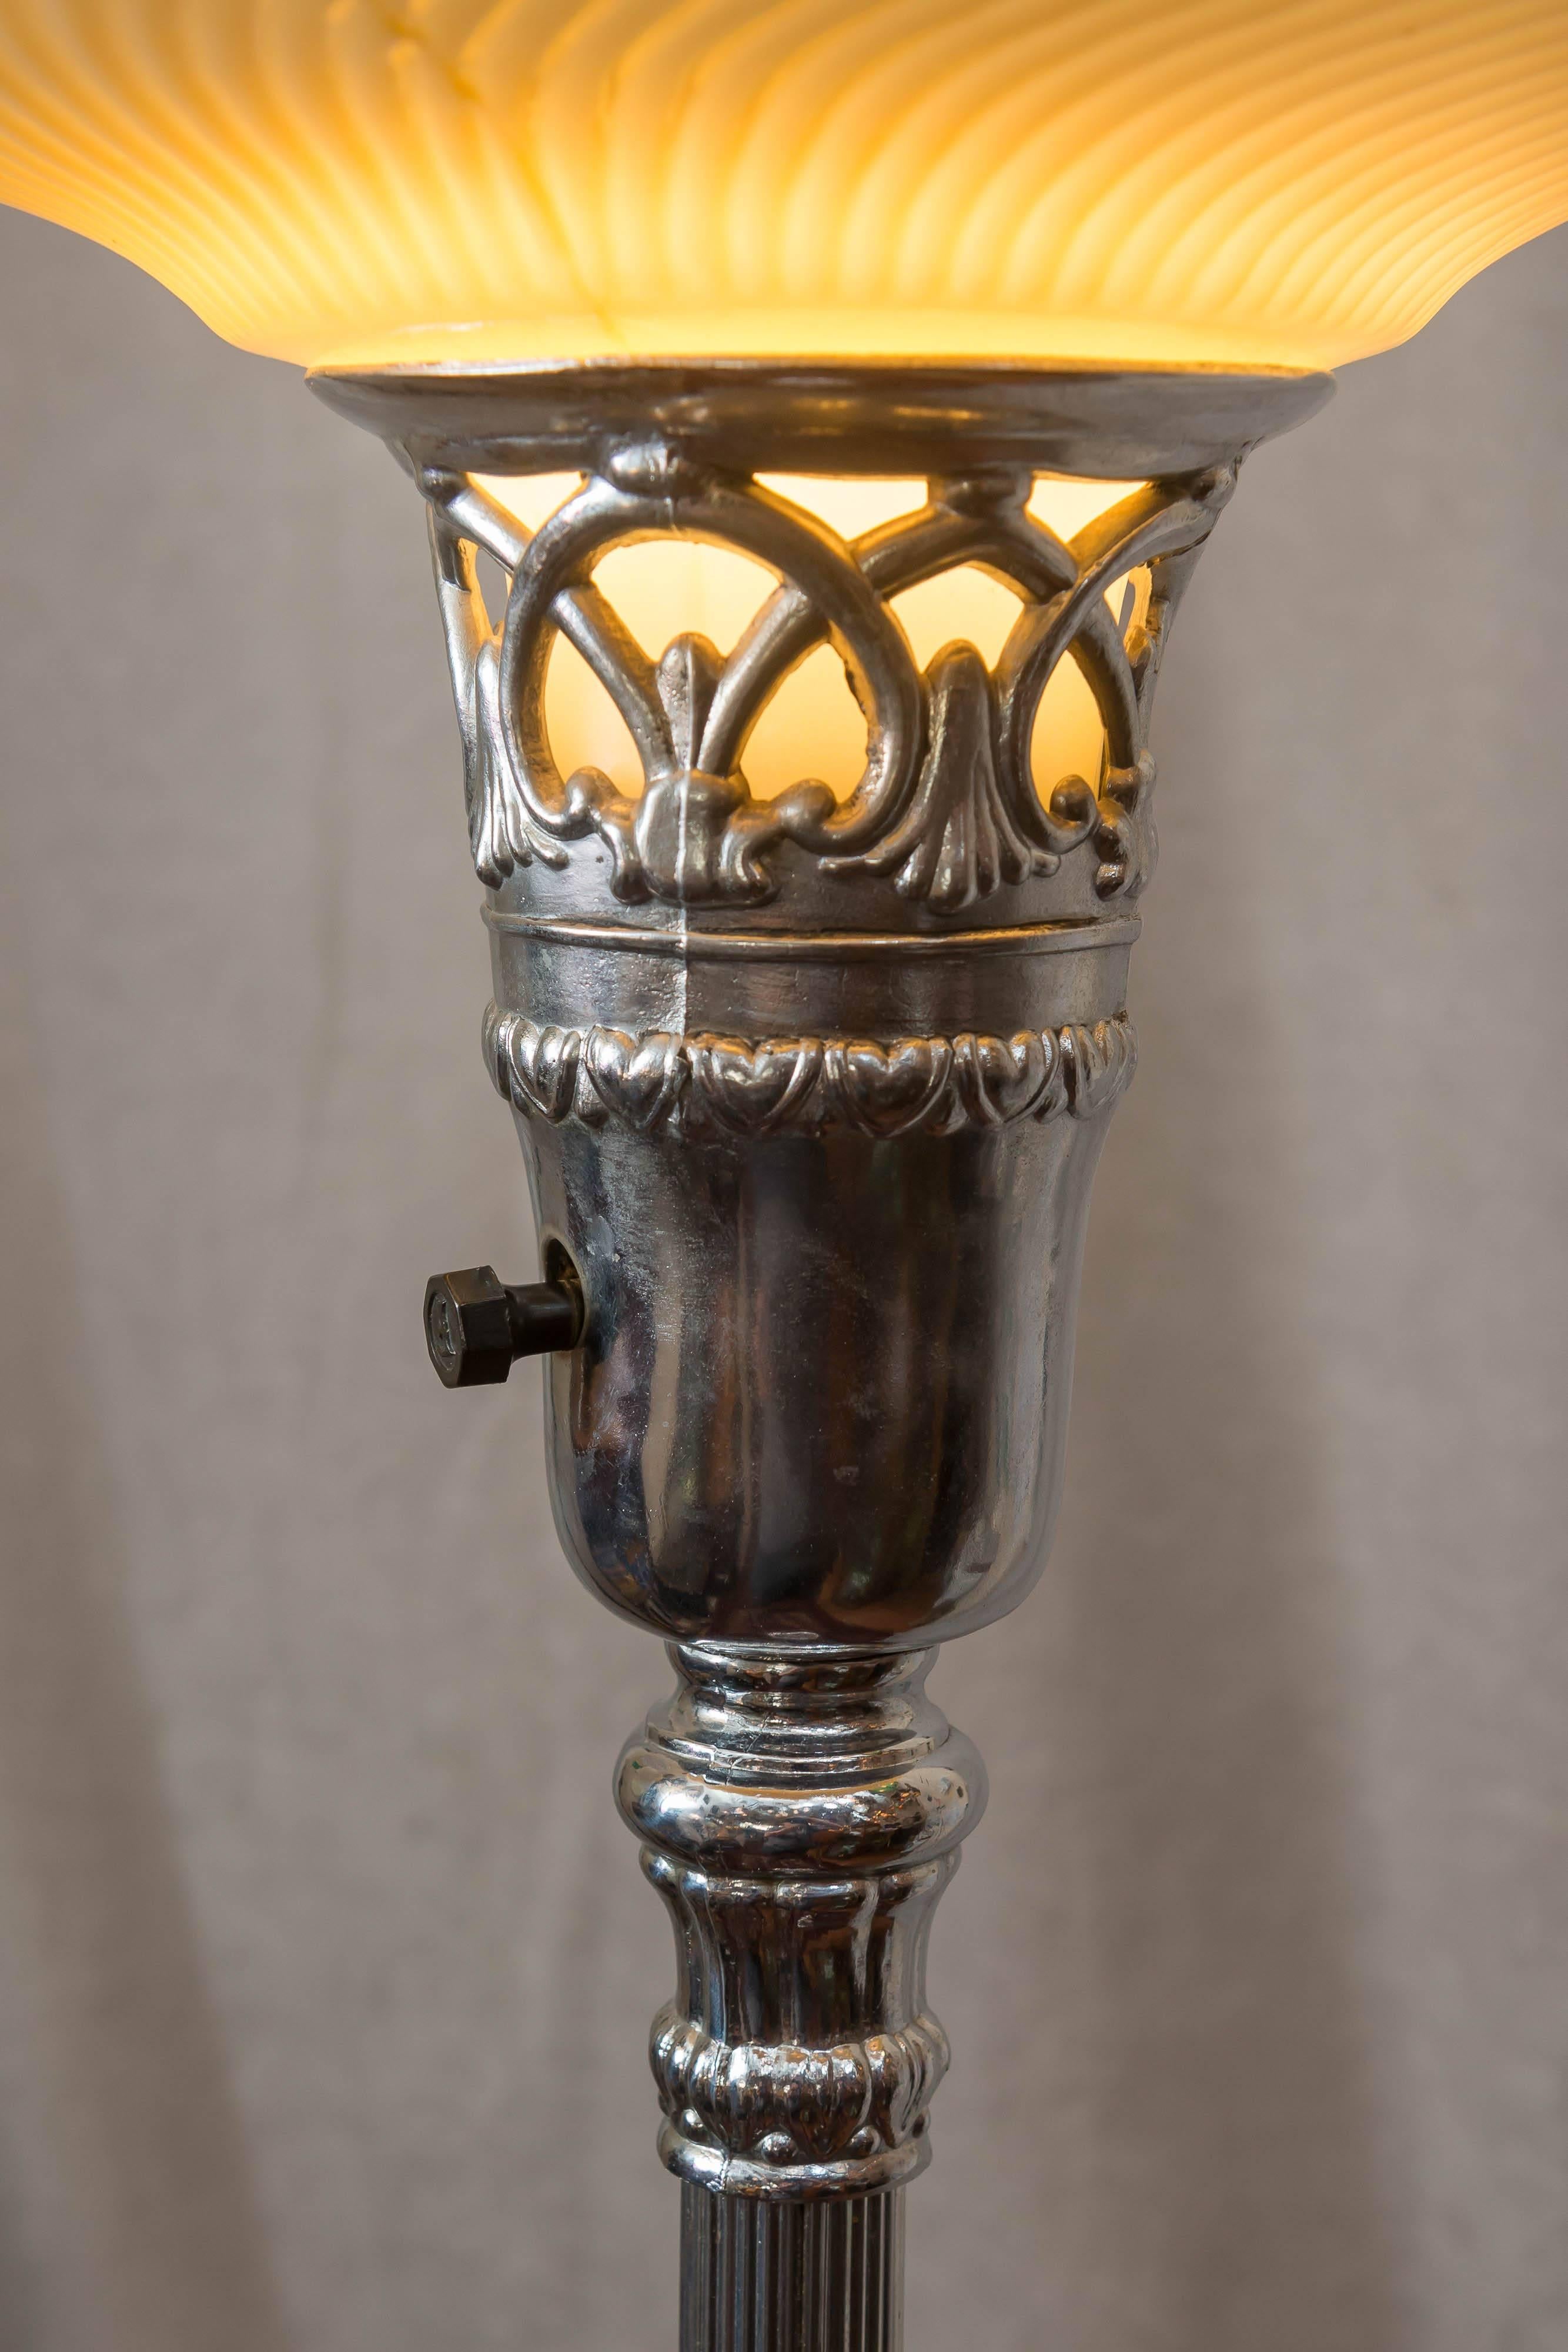 American Chrome-Plated Torchiere Floor Lamp with Agate Glass, and Original Glass Shade